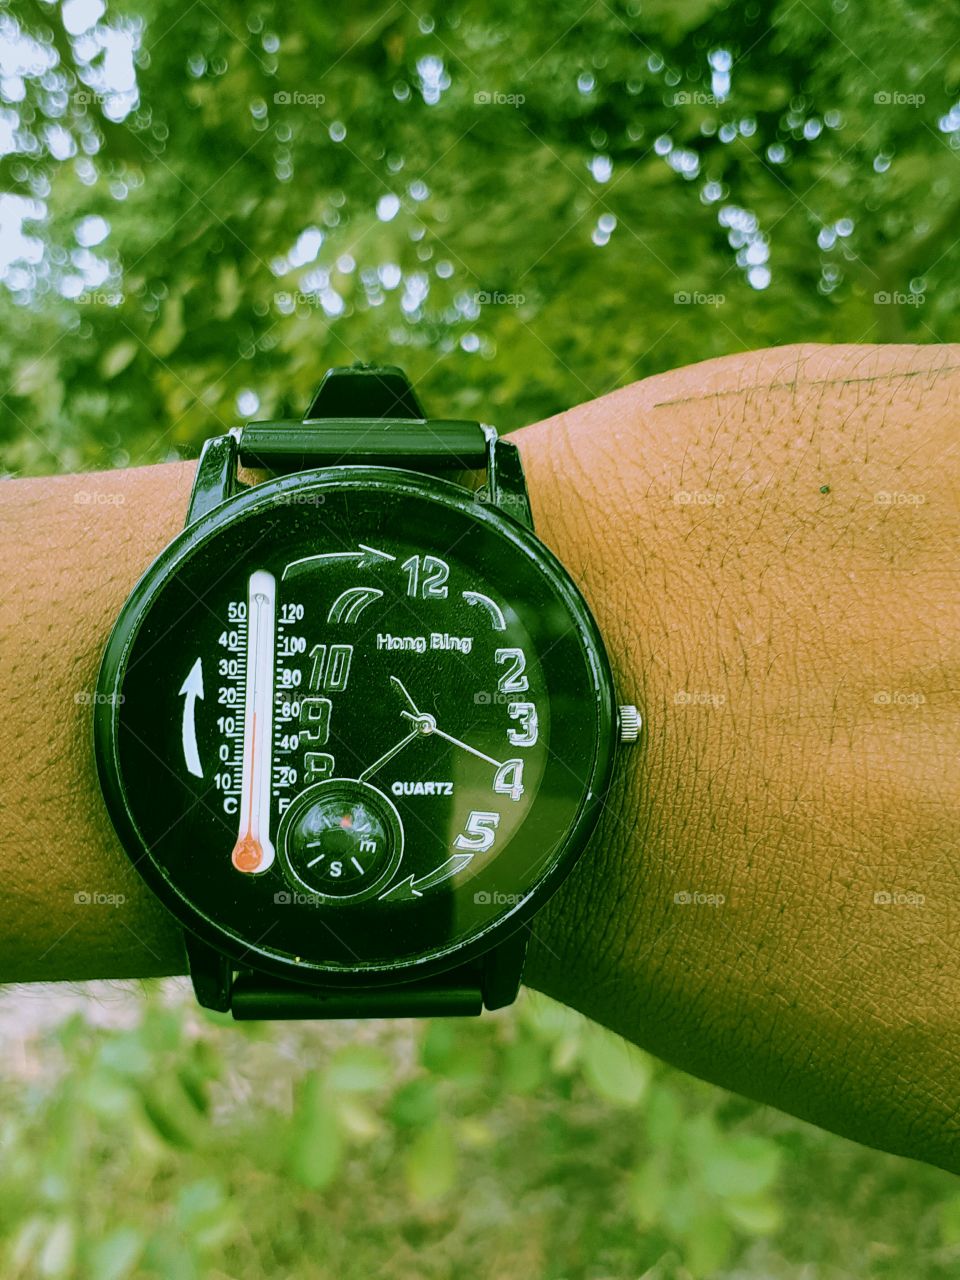 This is my watch